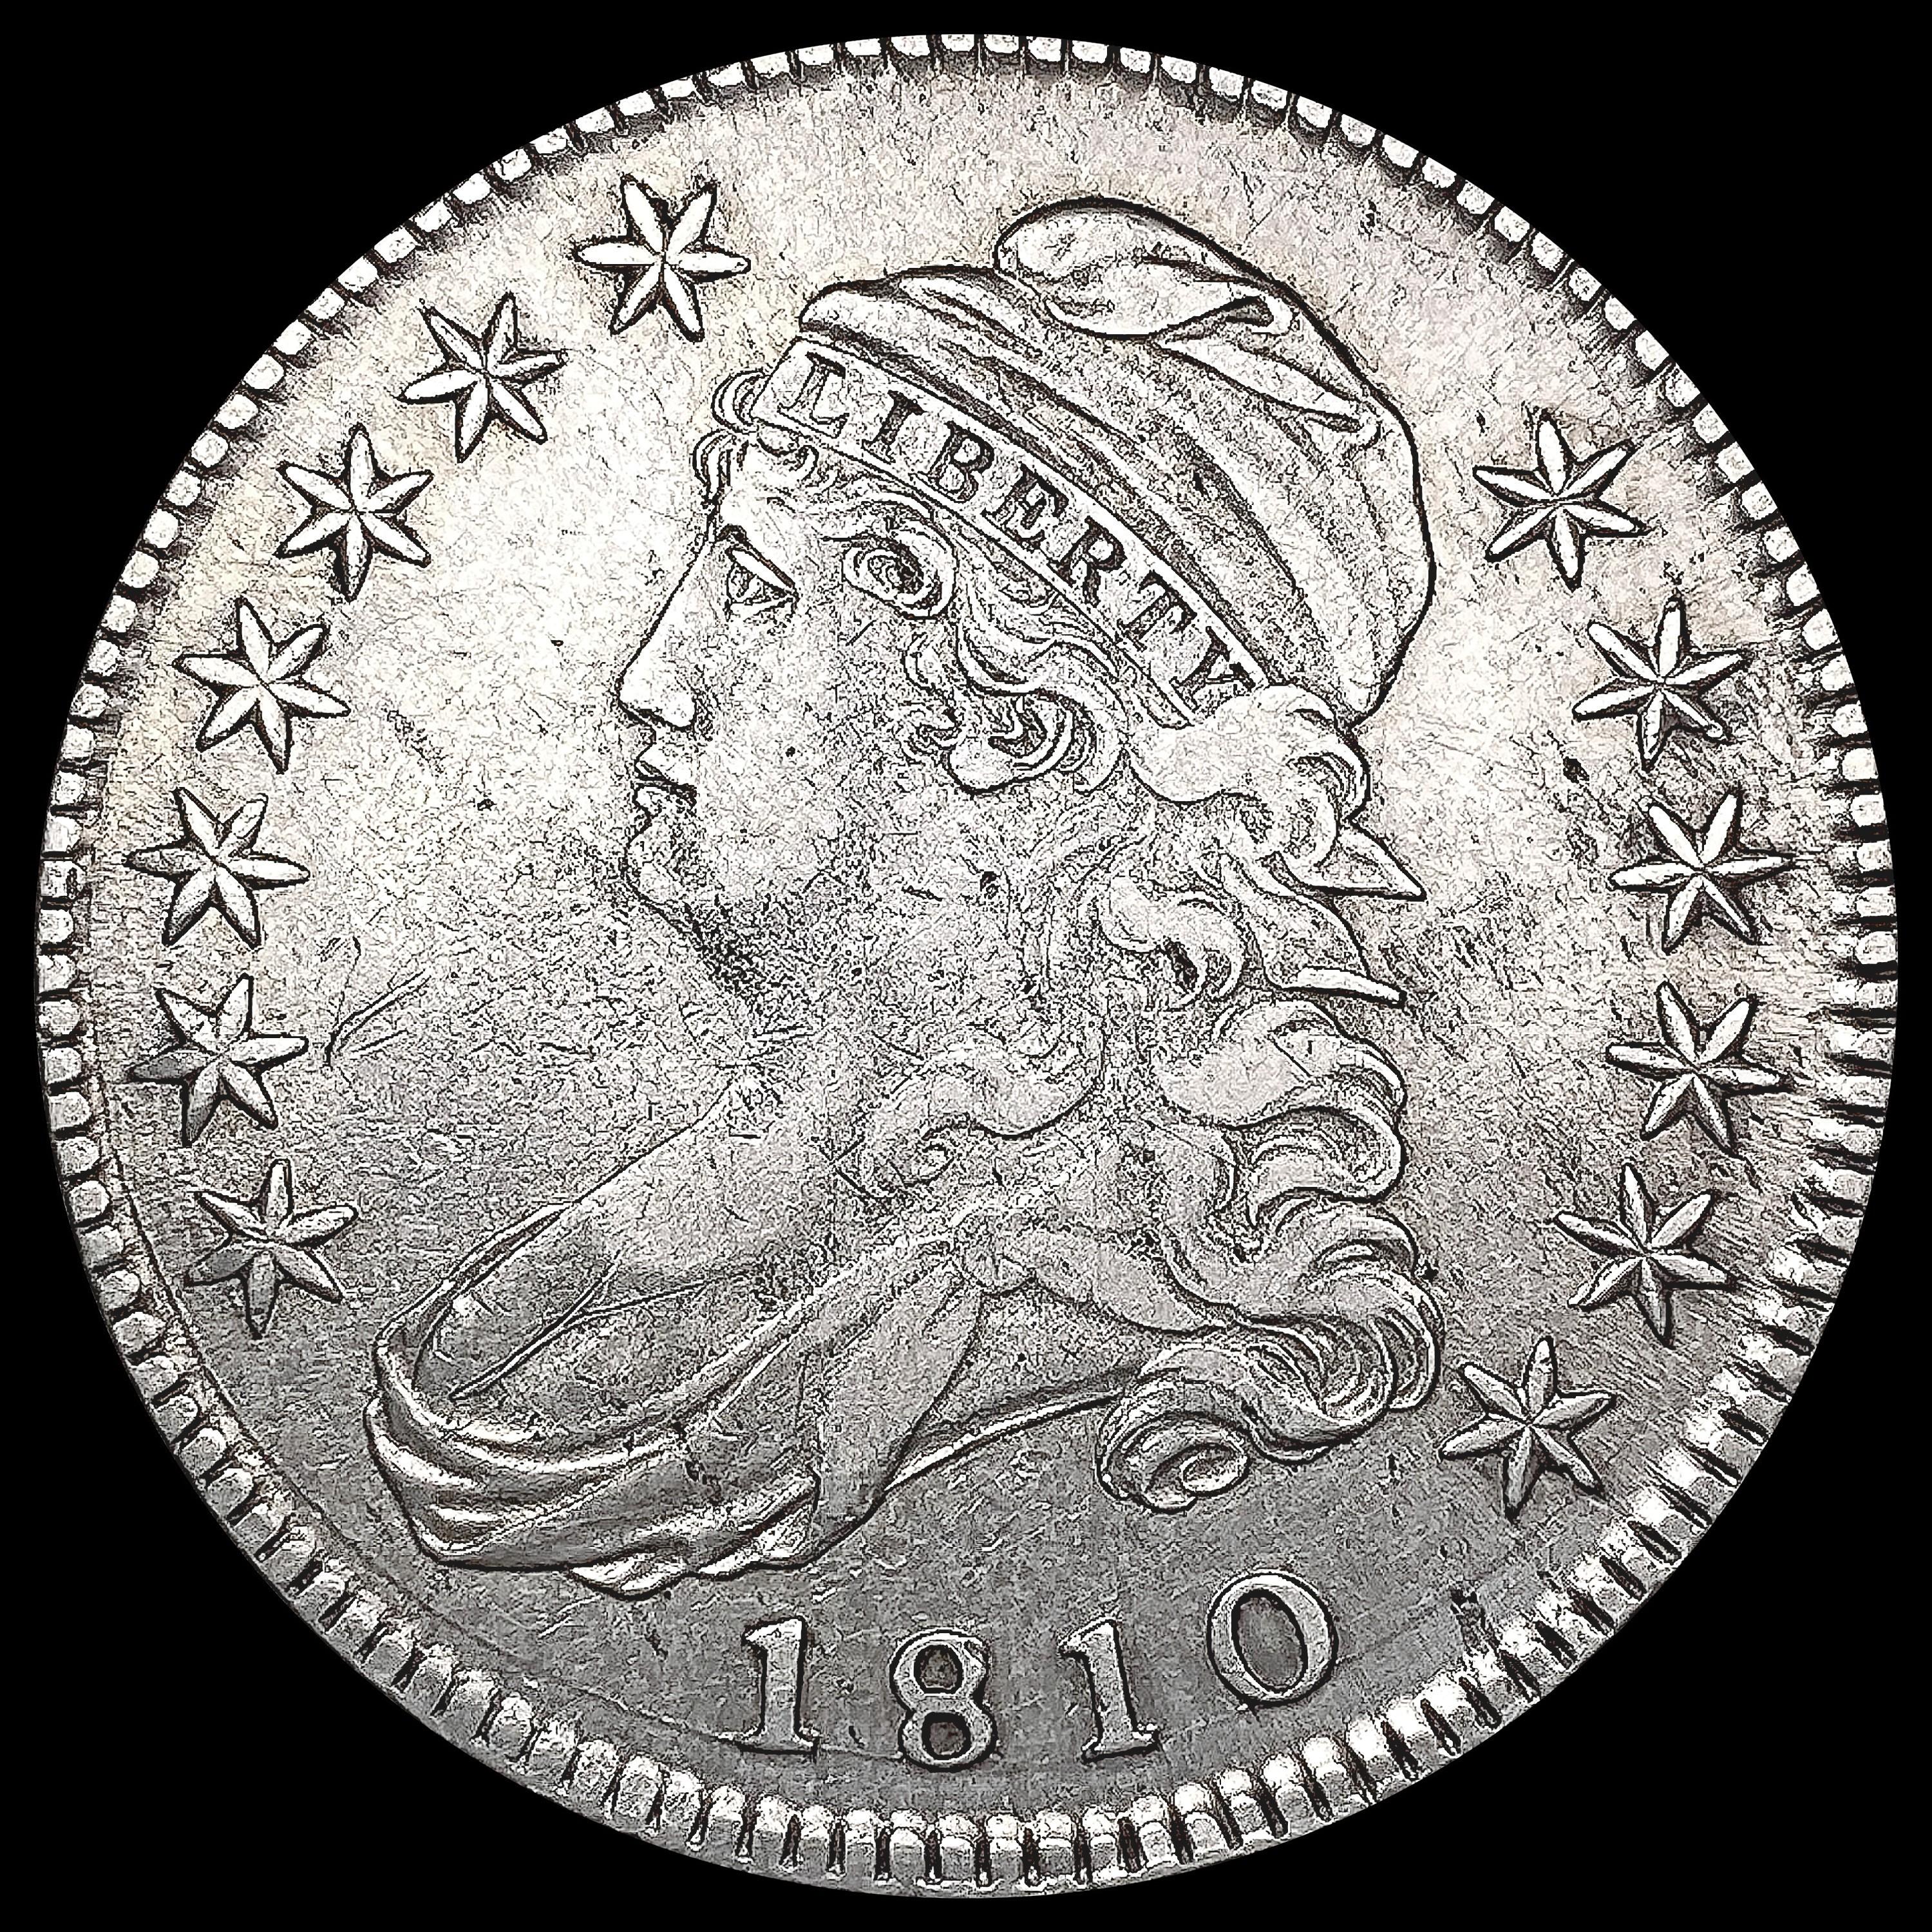 1810 Capped Bust Half Dollar NEARLY UNCIRCULATED